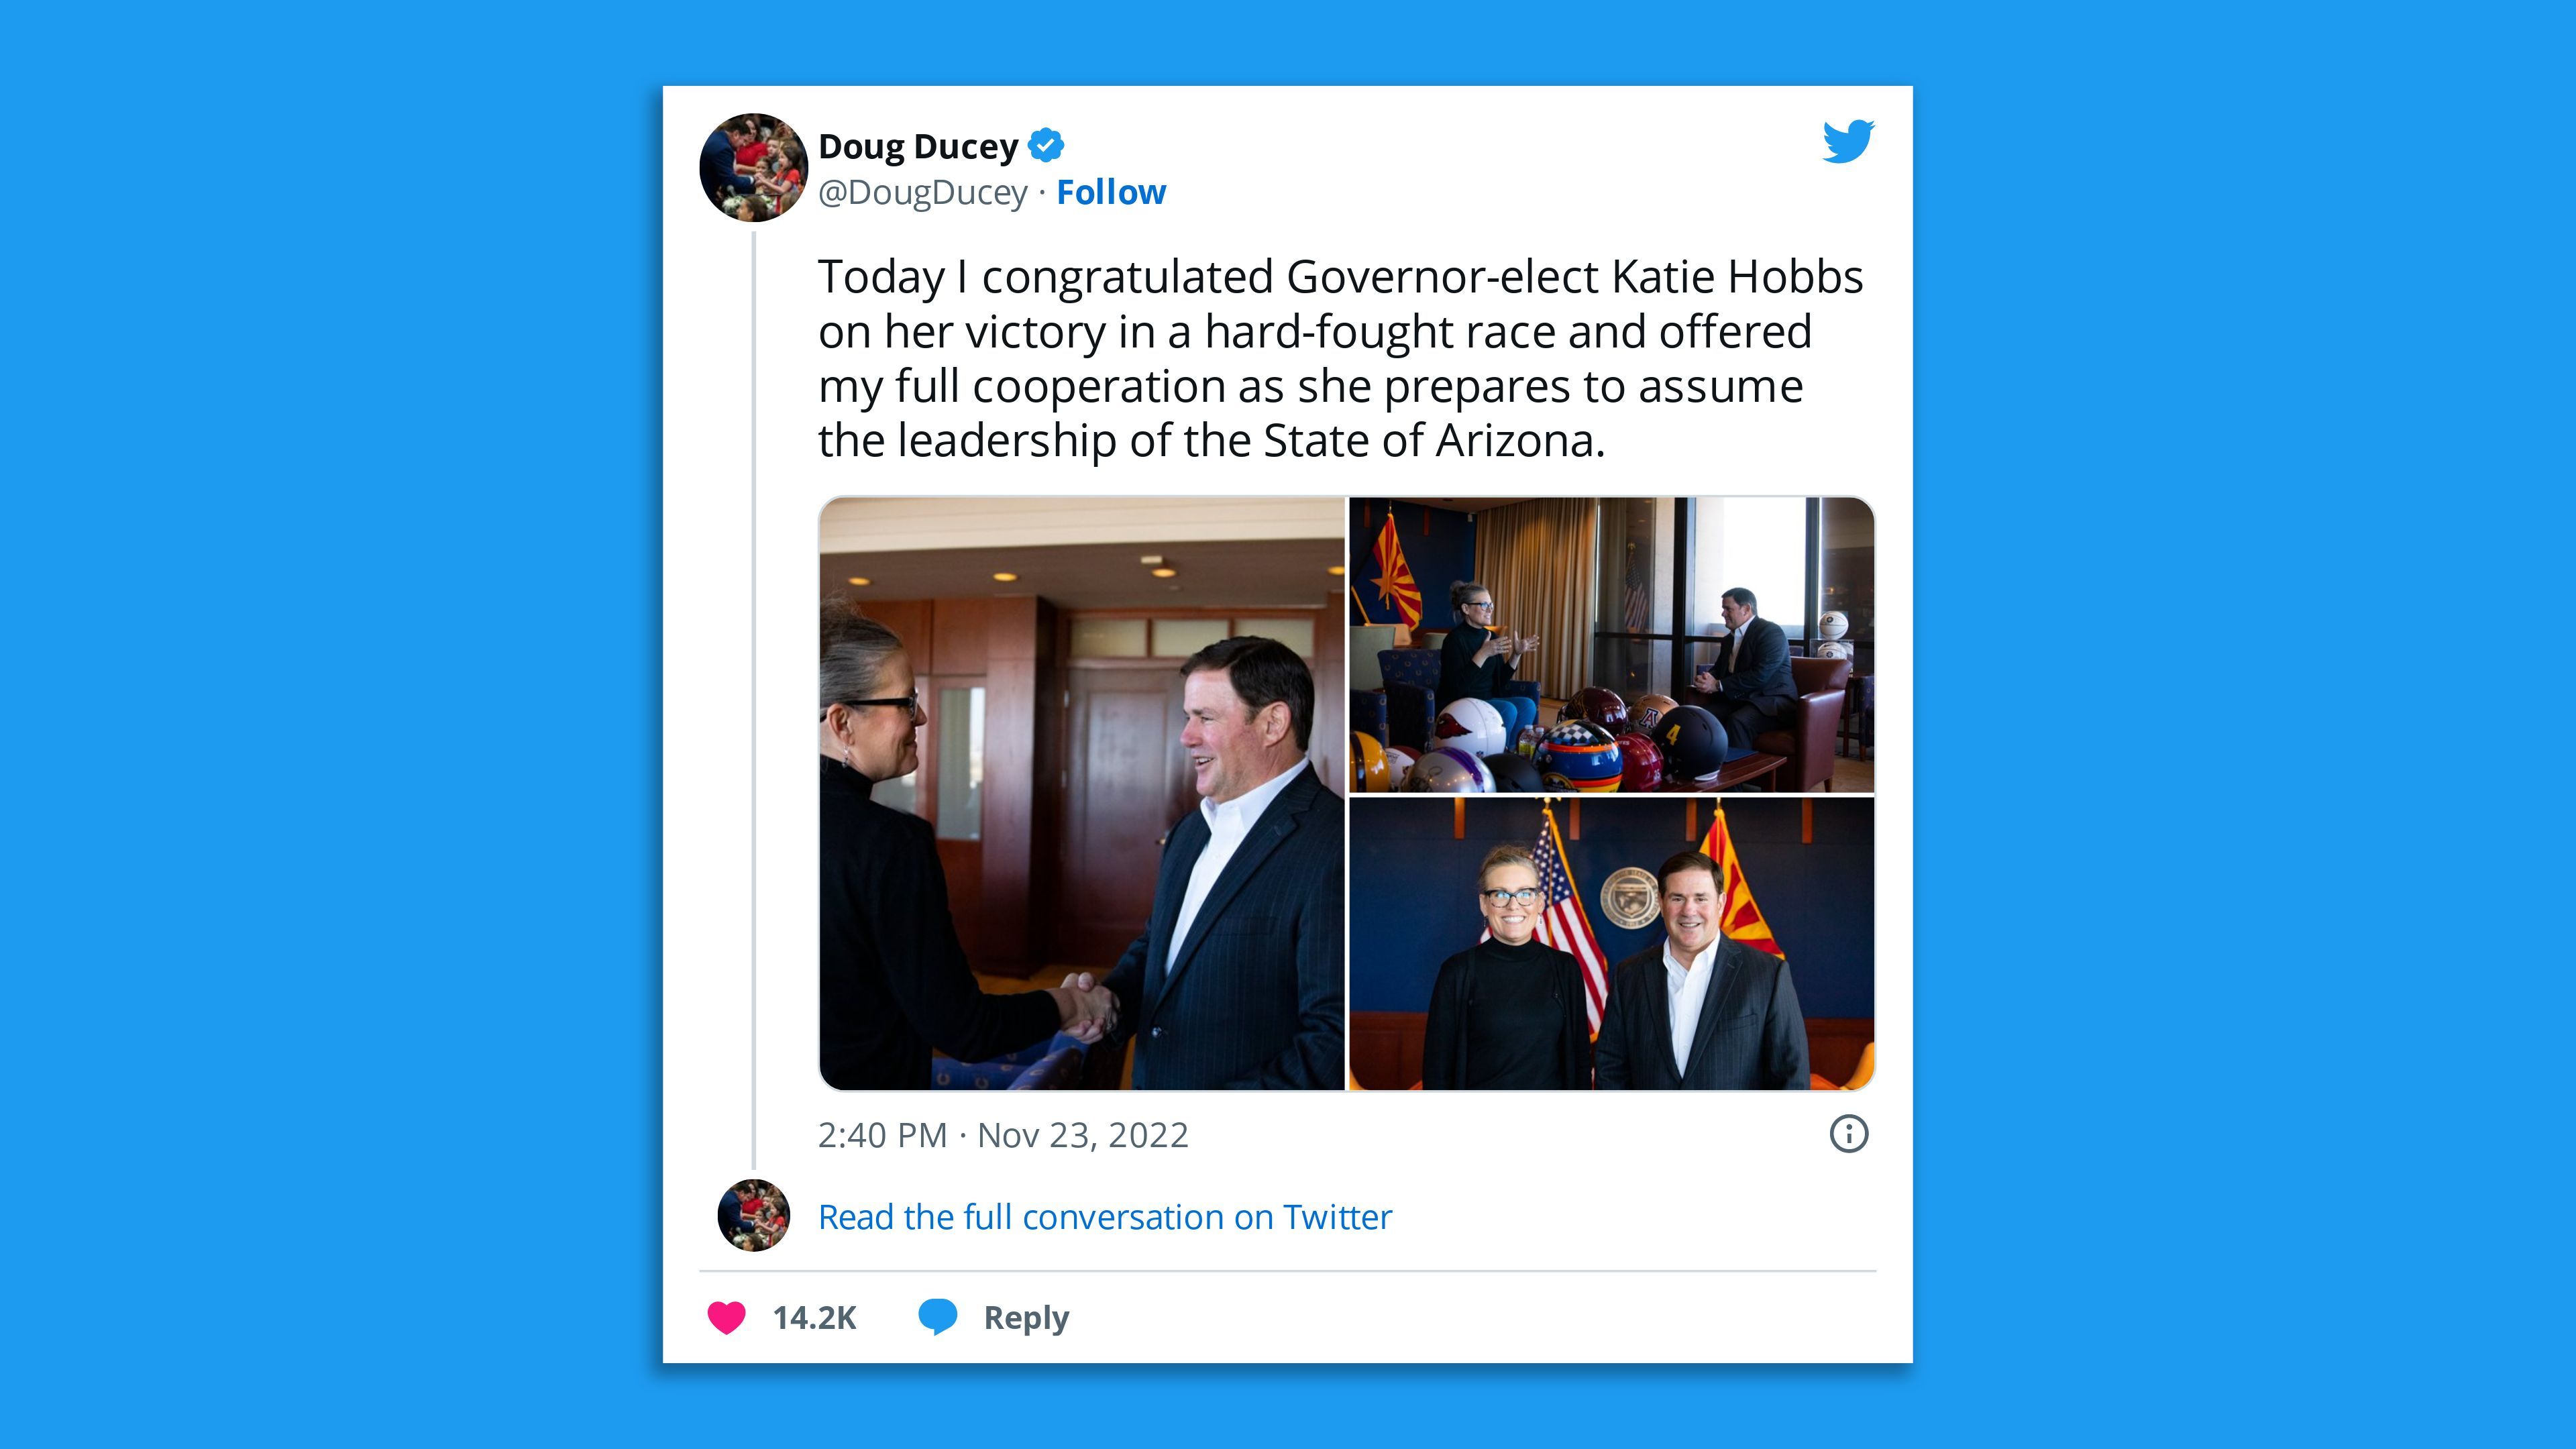 A screenshot of a tweet by Arizona Governor Doug Ducey with Governor-elect Katie Hobbs congratulating her on her victory.